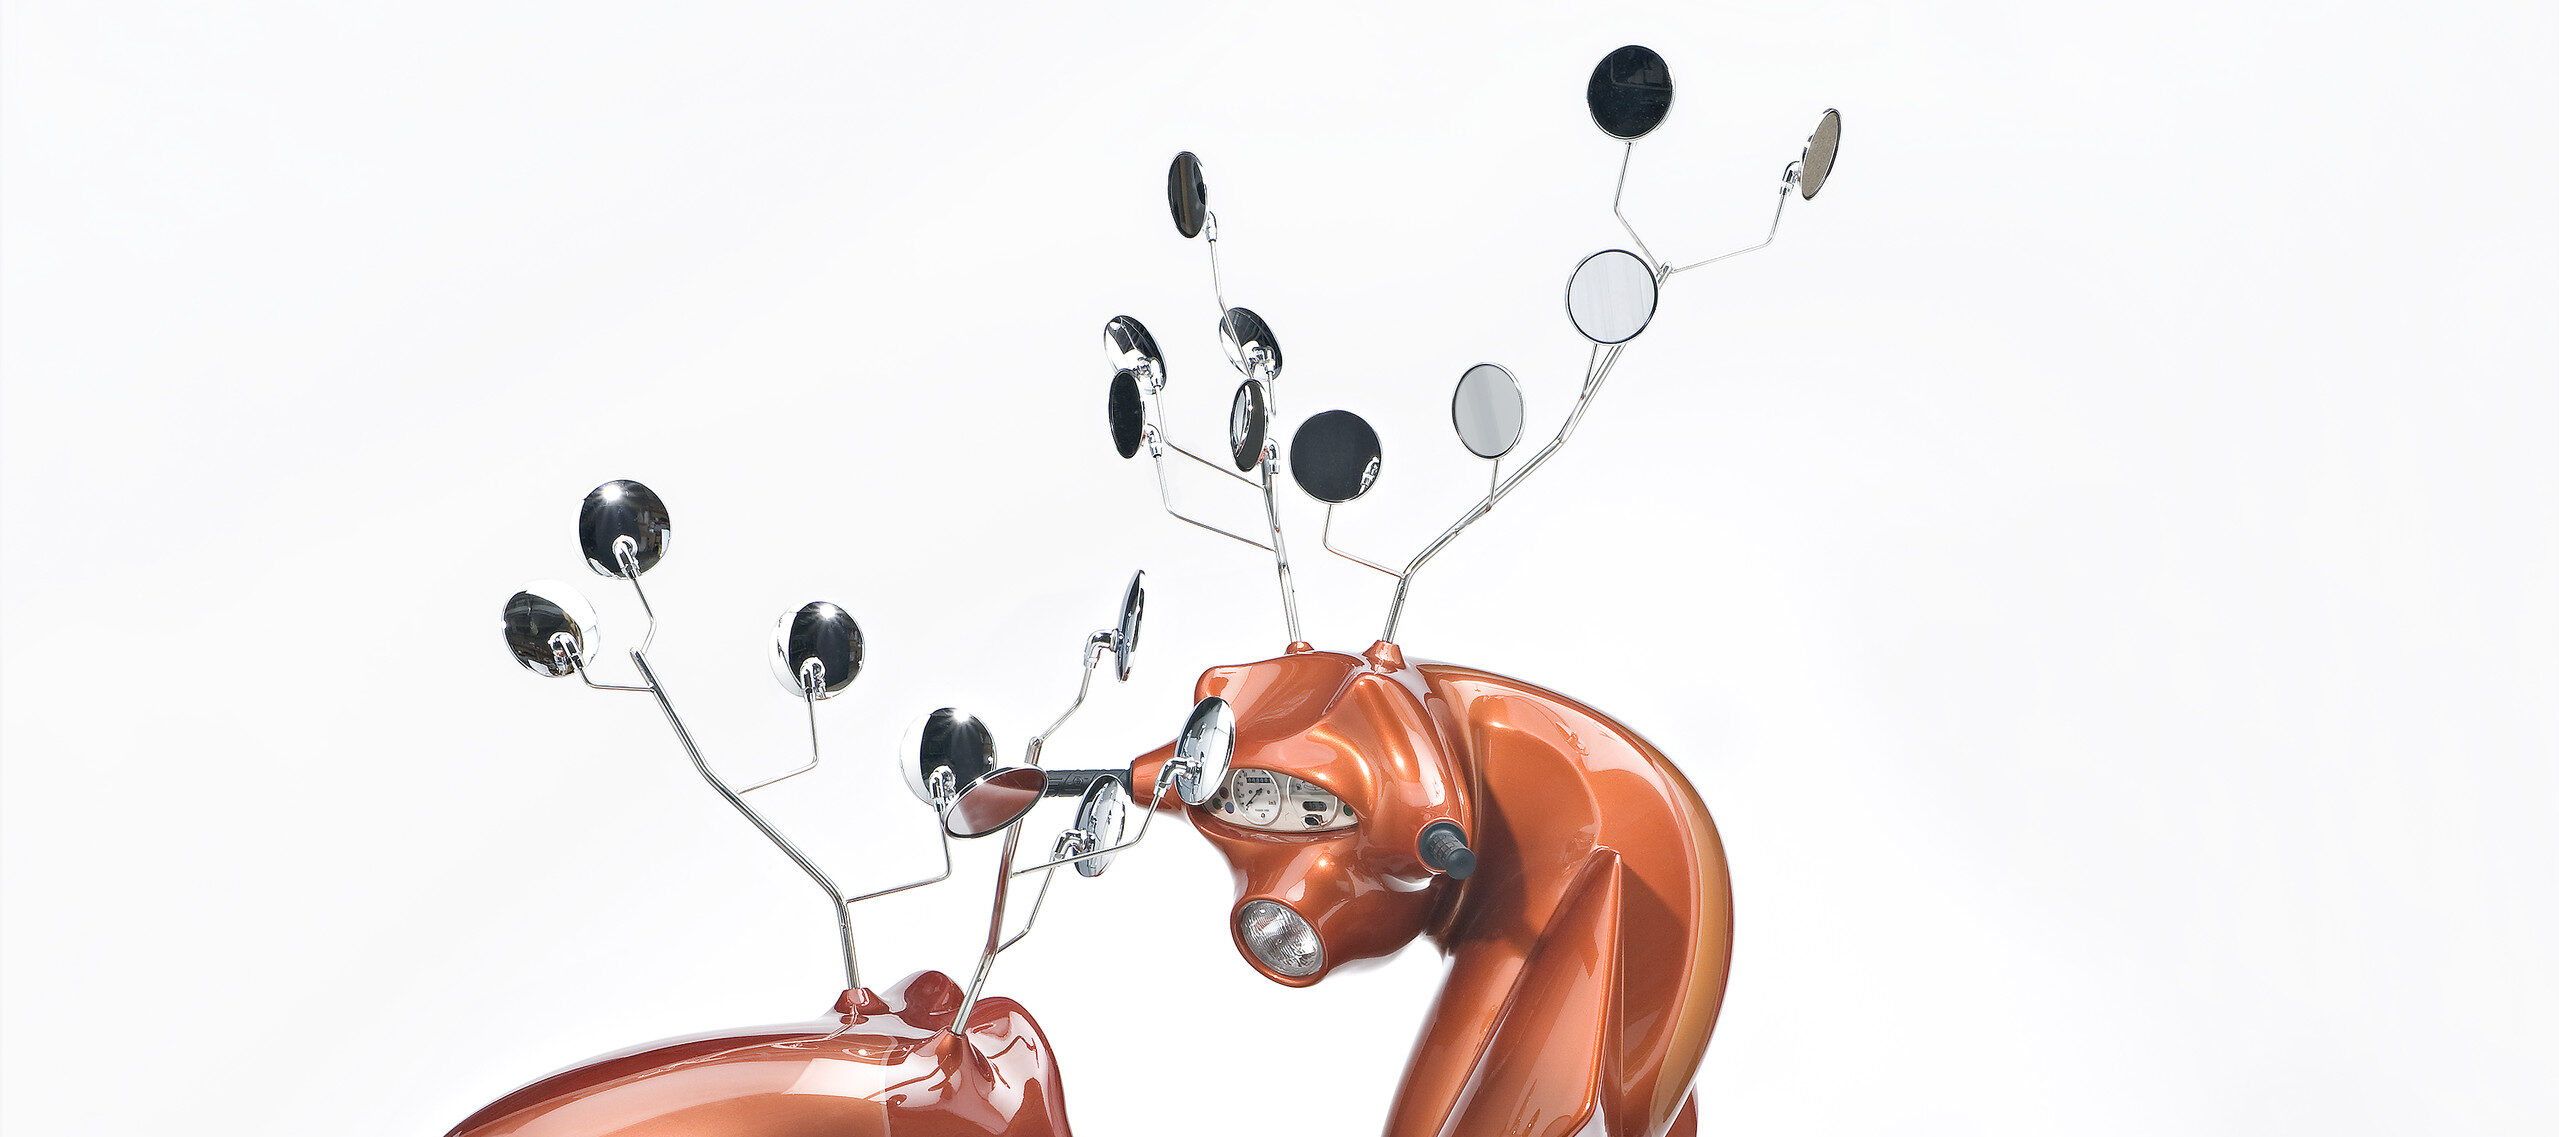 A sculpture consists of two metallic-orange motor scooters manipulated to resemble male deer. Leather seats become haunches, dashboard dials resemble faces, and multiple rear-view mirrors morph into antlers. The serpentine, hybrid animal-machines appear to spar for dominance.